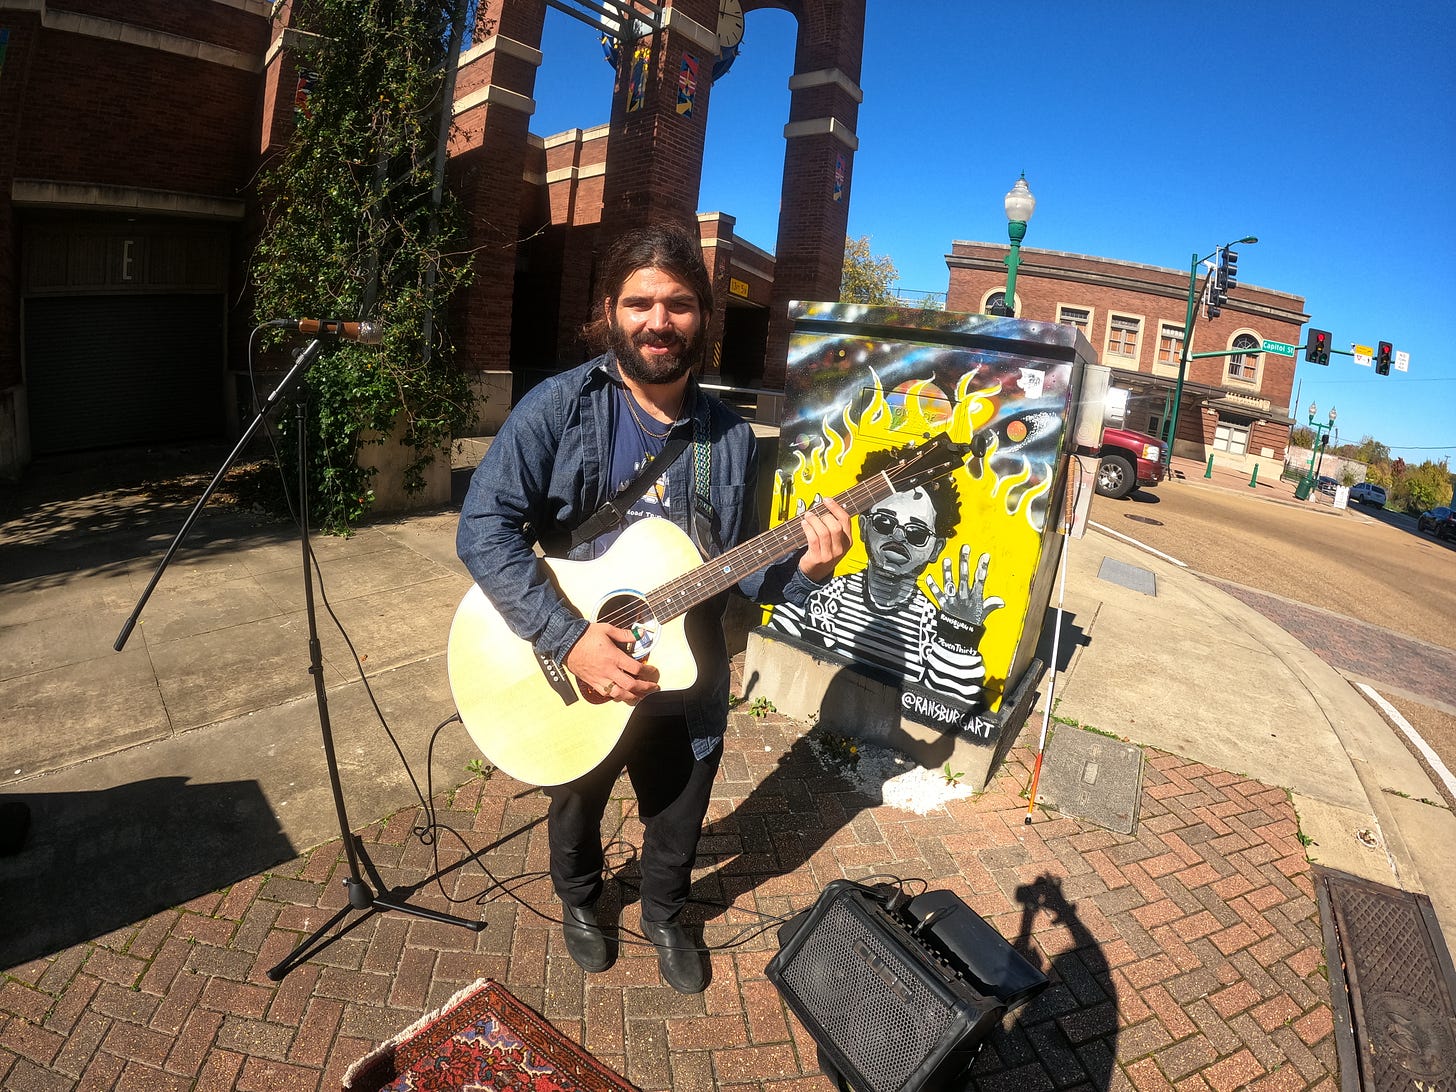 Anthony posted up on the corner getting ready to live stream to Facebook in Jackson, Mississippi a piece of art work is behind him with a guy released from jail in a yellow flame and sunglasses